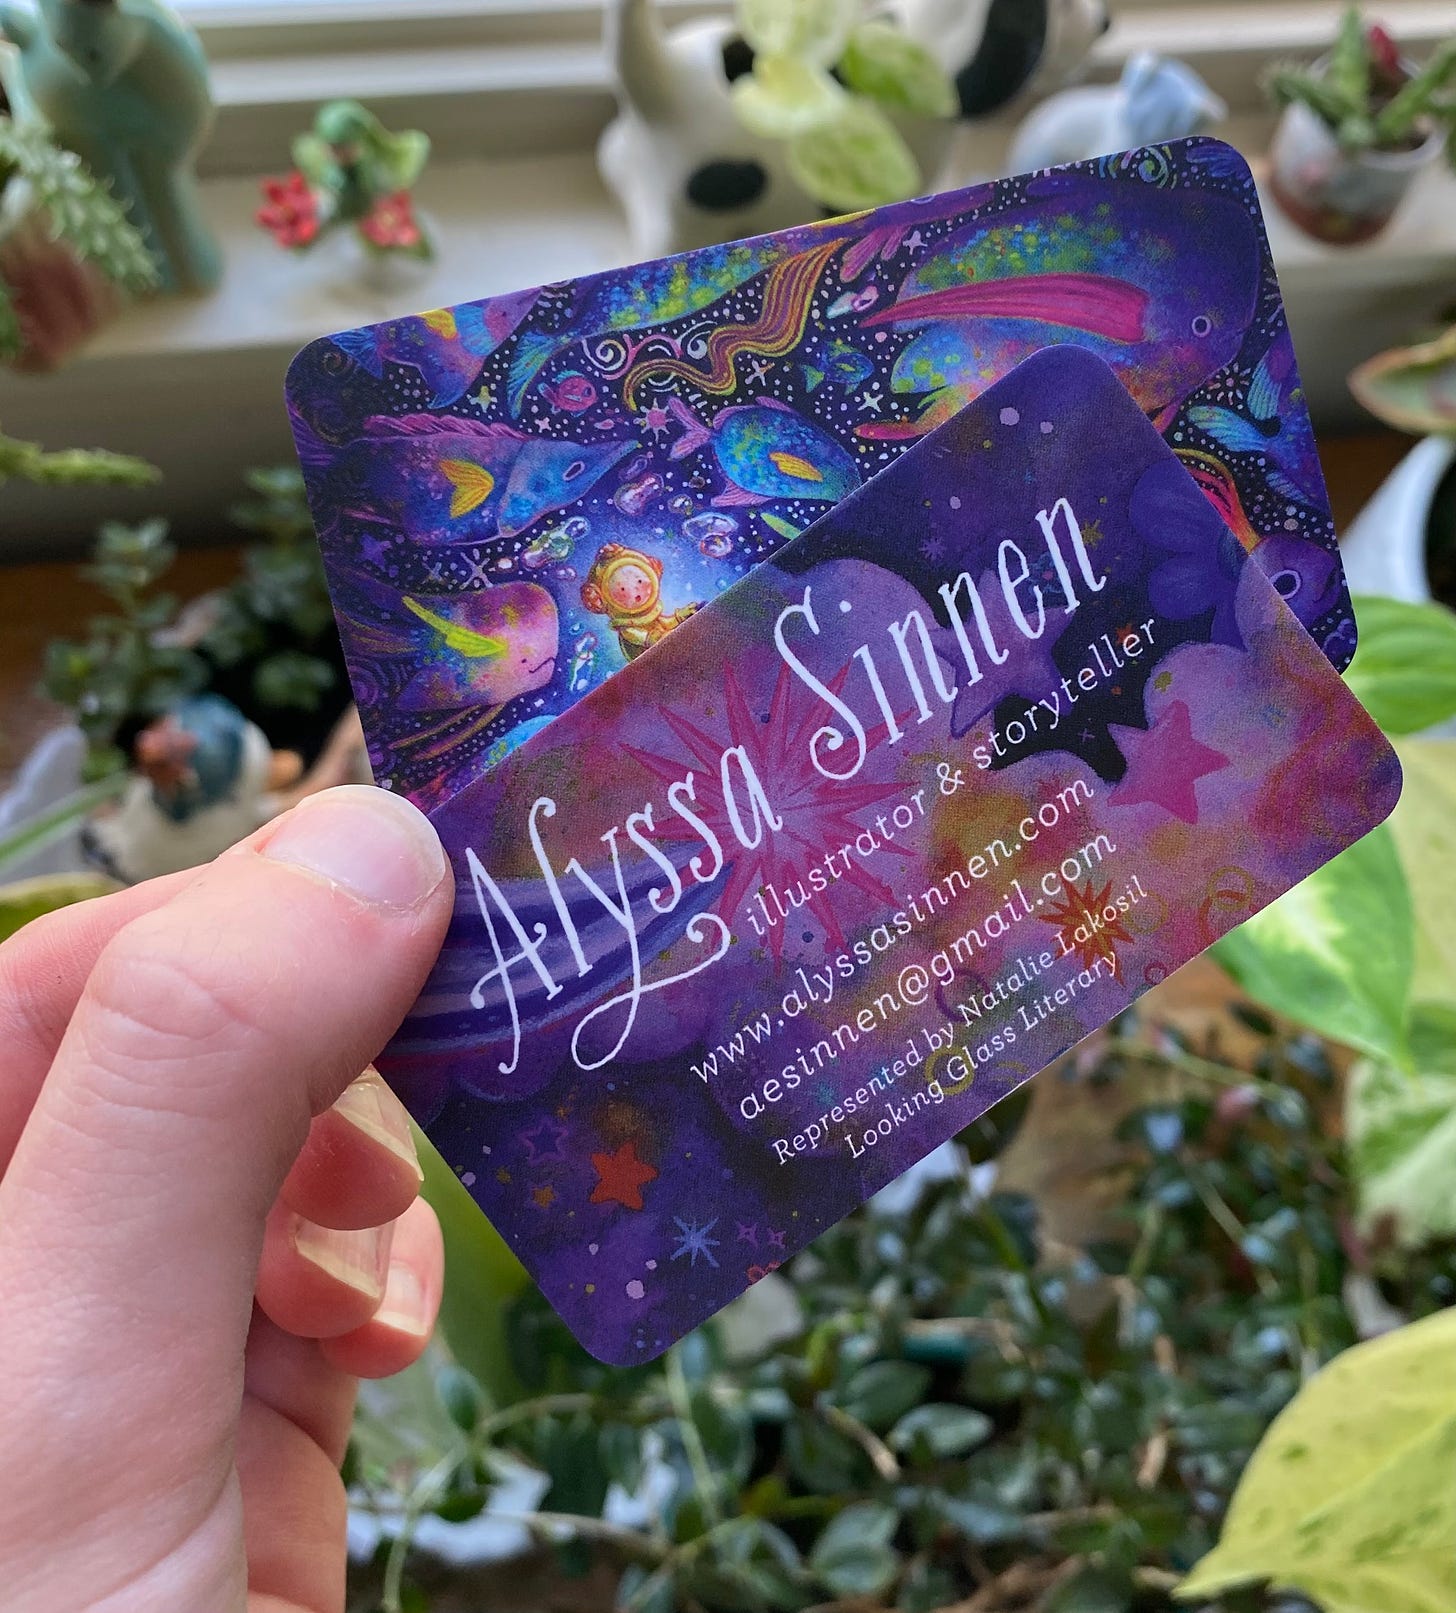 Hand holding two purple colored business cards with the artists' contact information, backdropped by many houseplants.